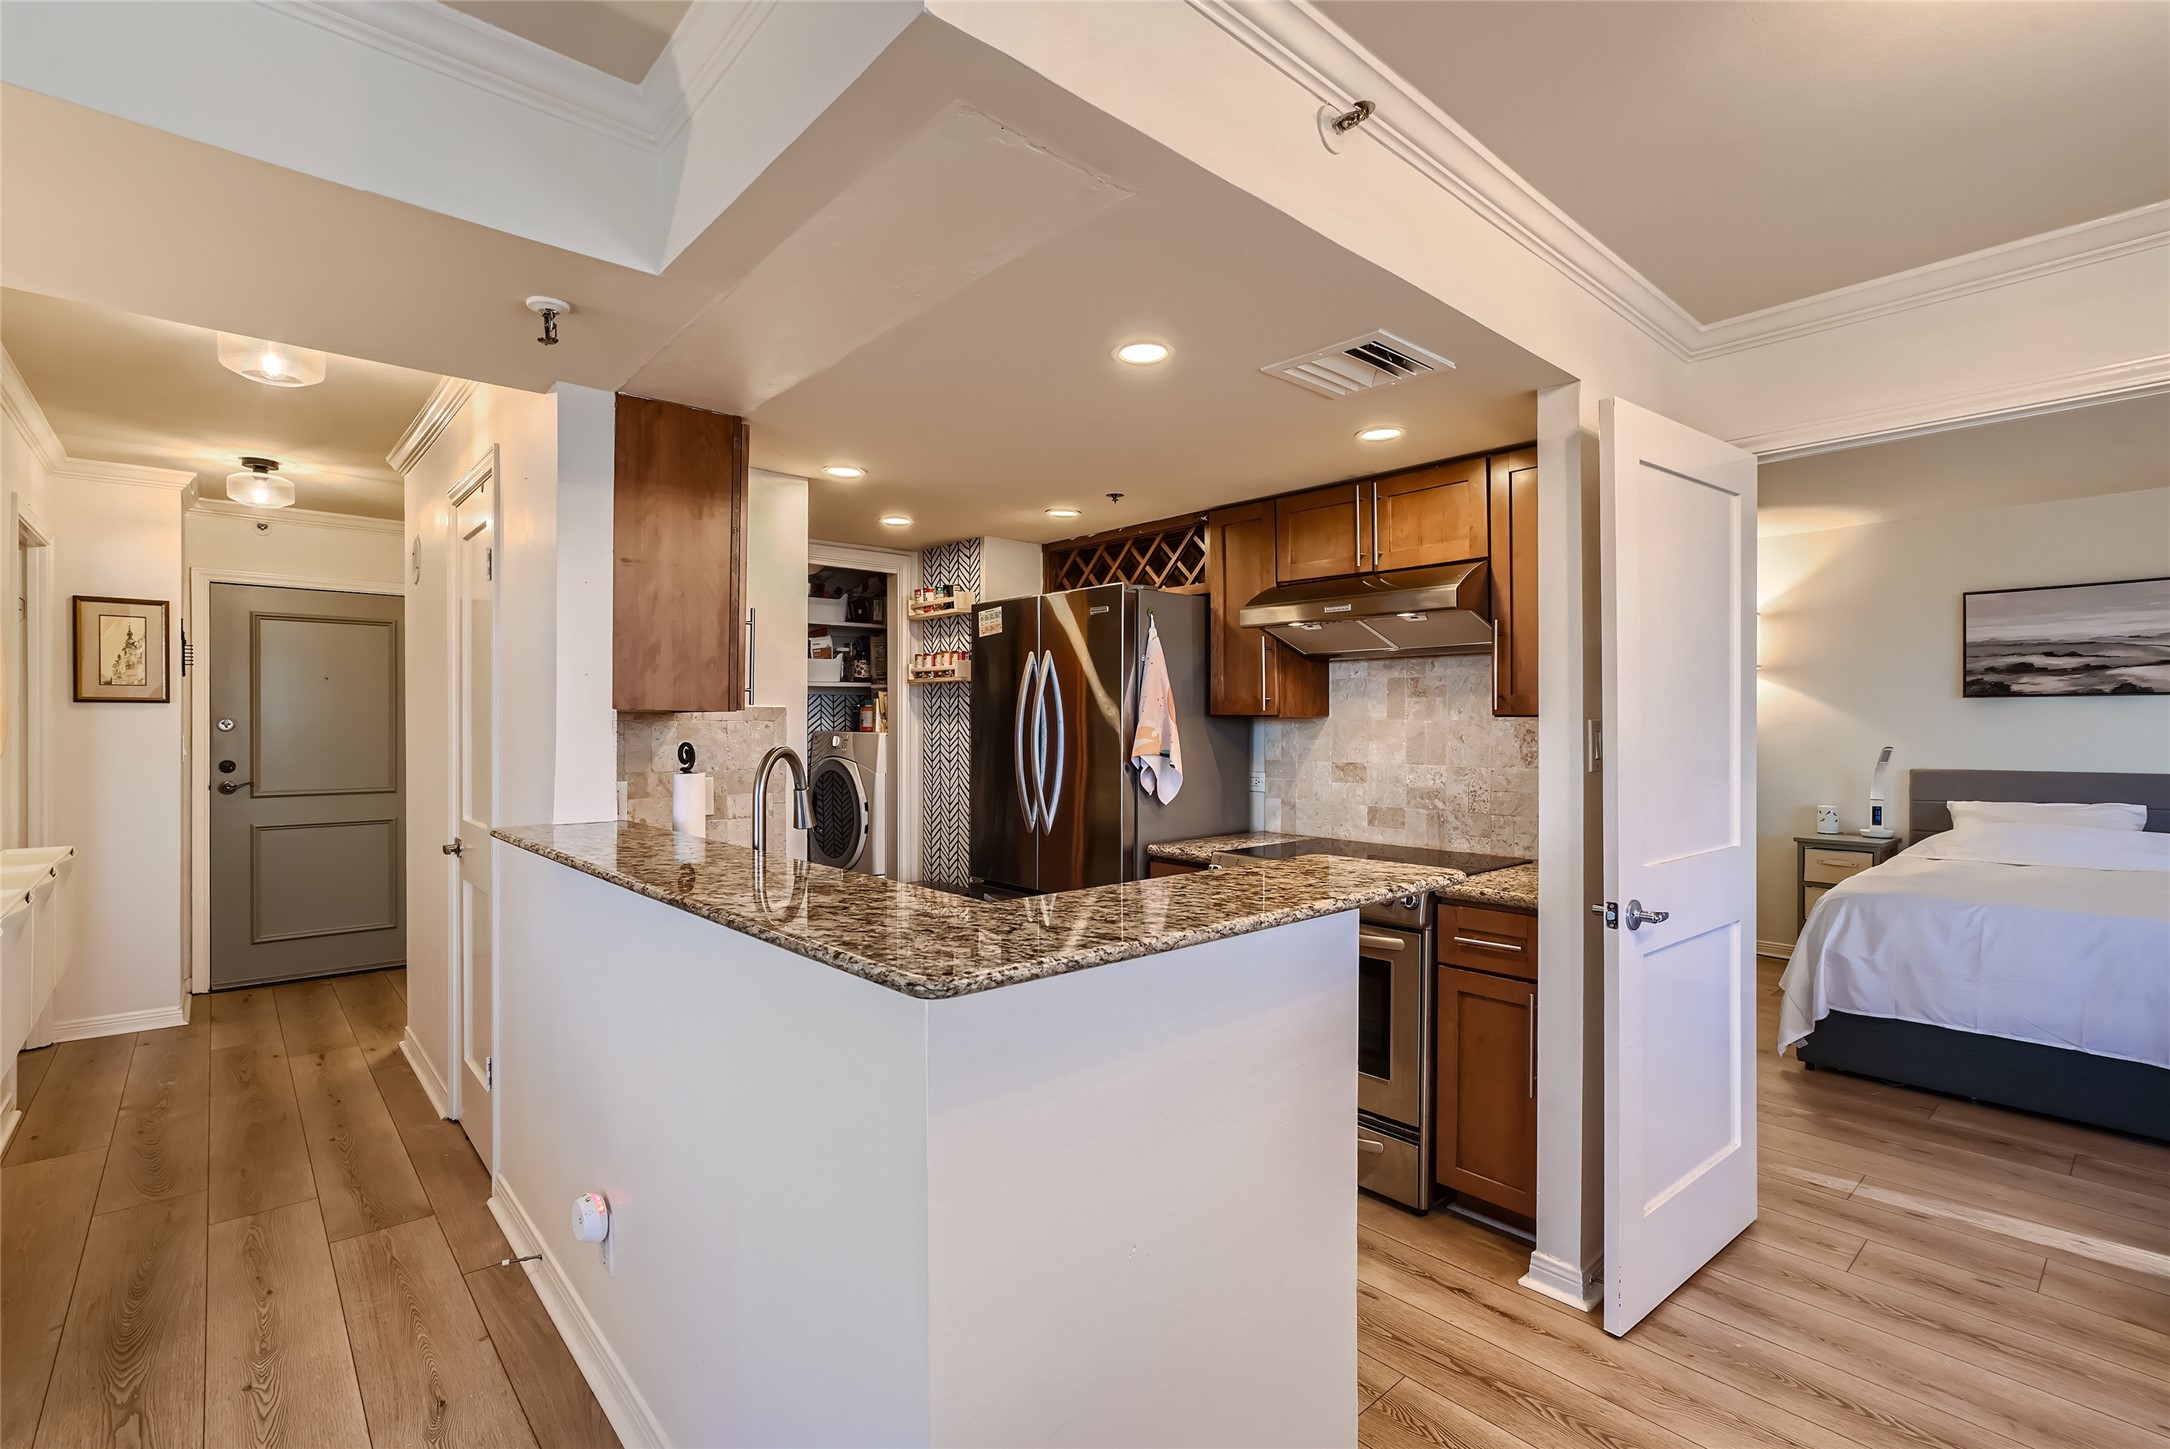 This charming kitchen blends style and functionality and includes stainless steel appliances.